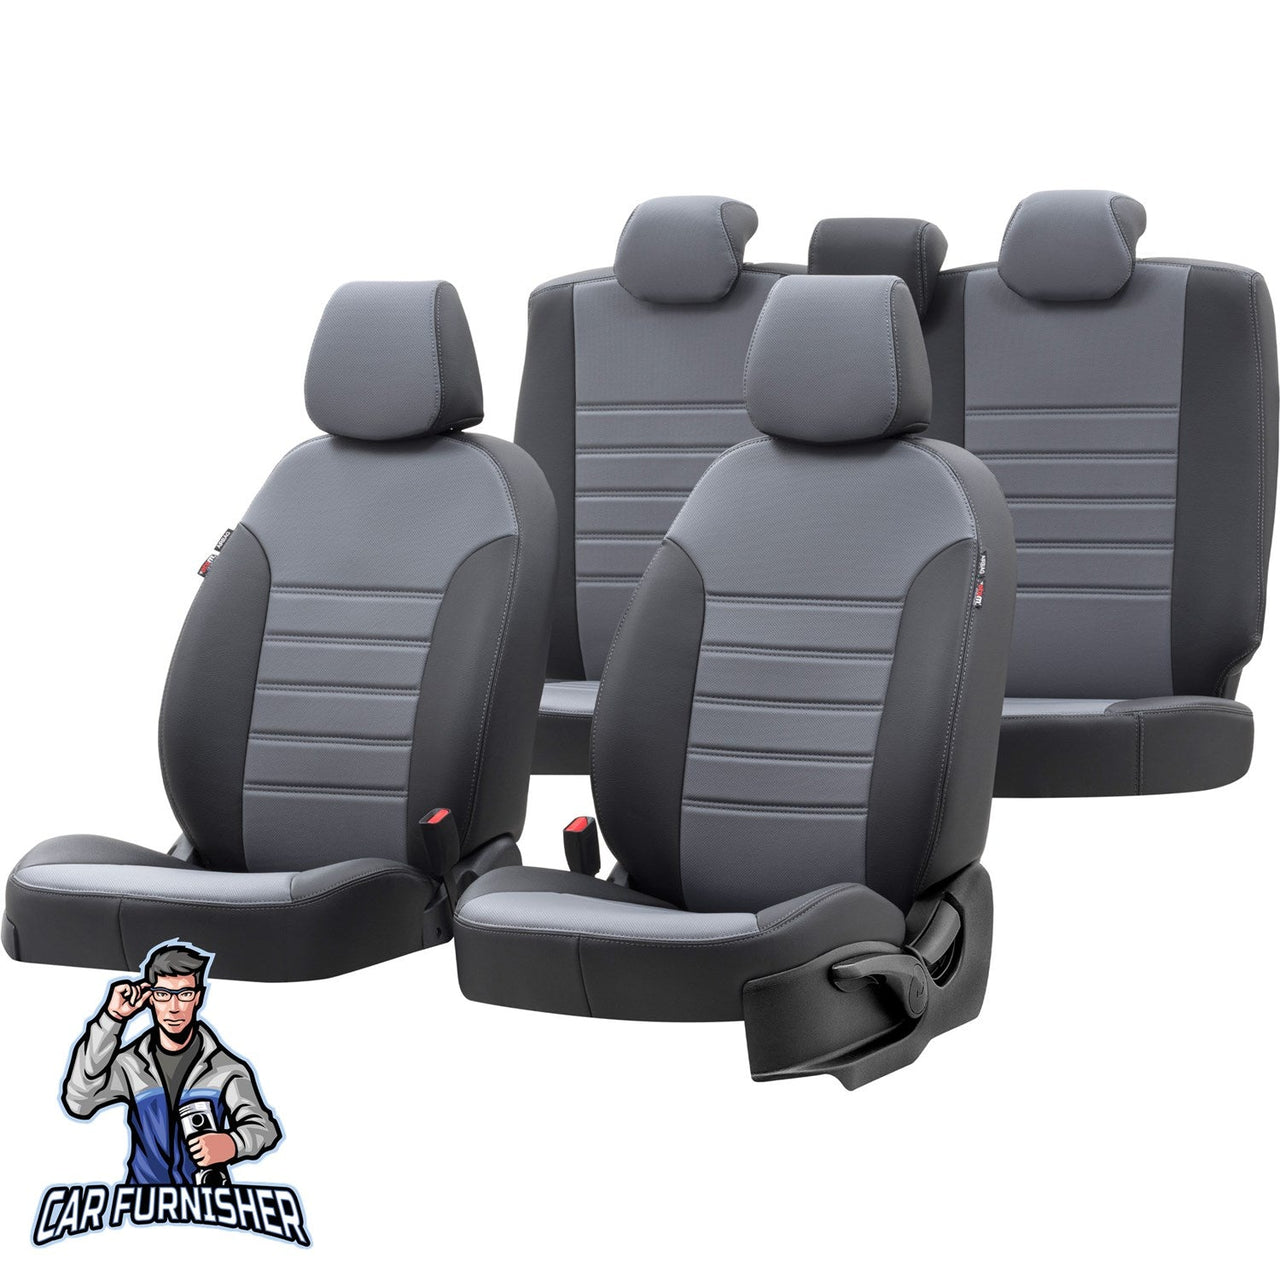 Volkswagen Caddy Seat Cover Istanbul Leather Design Smoked Black Leather